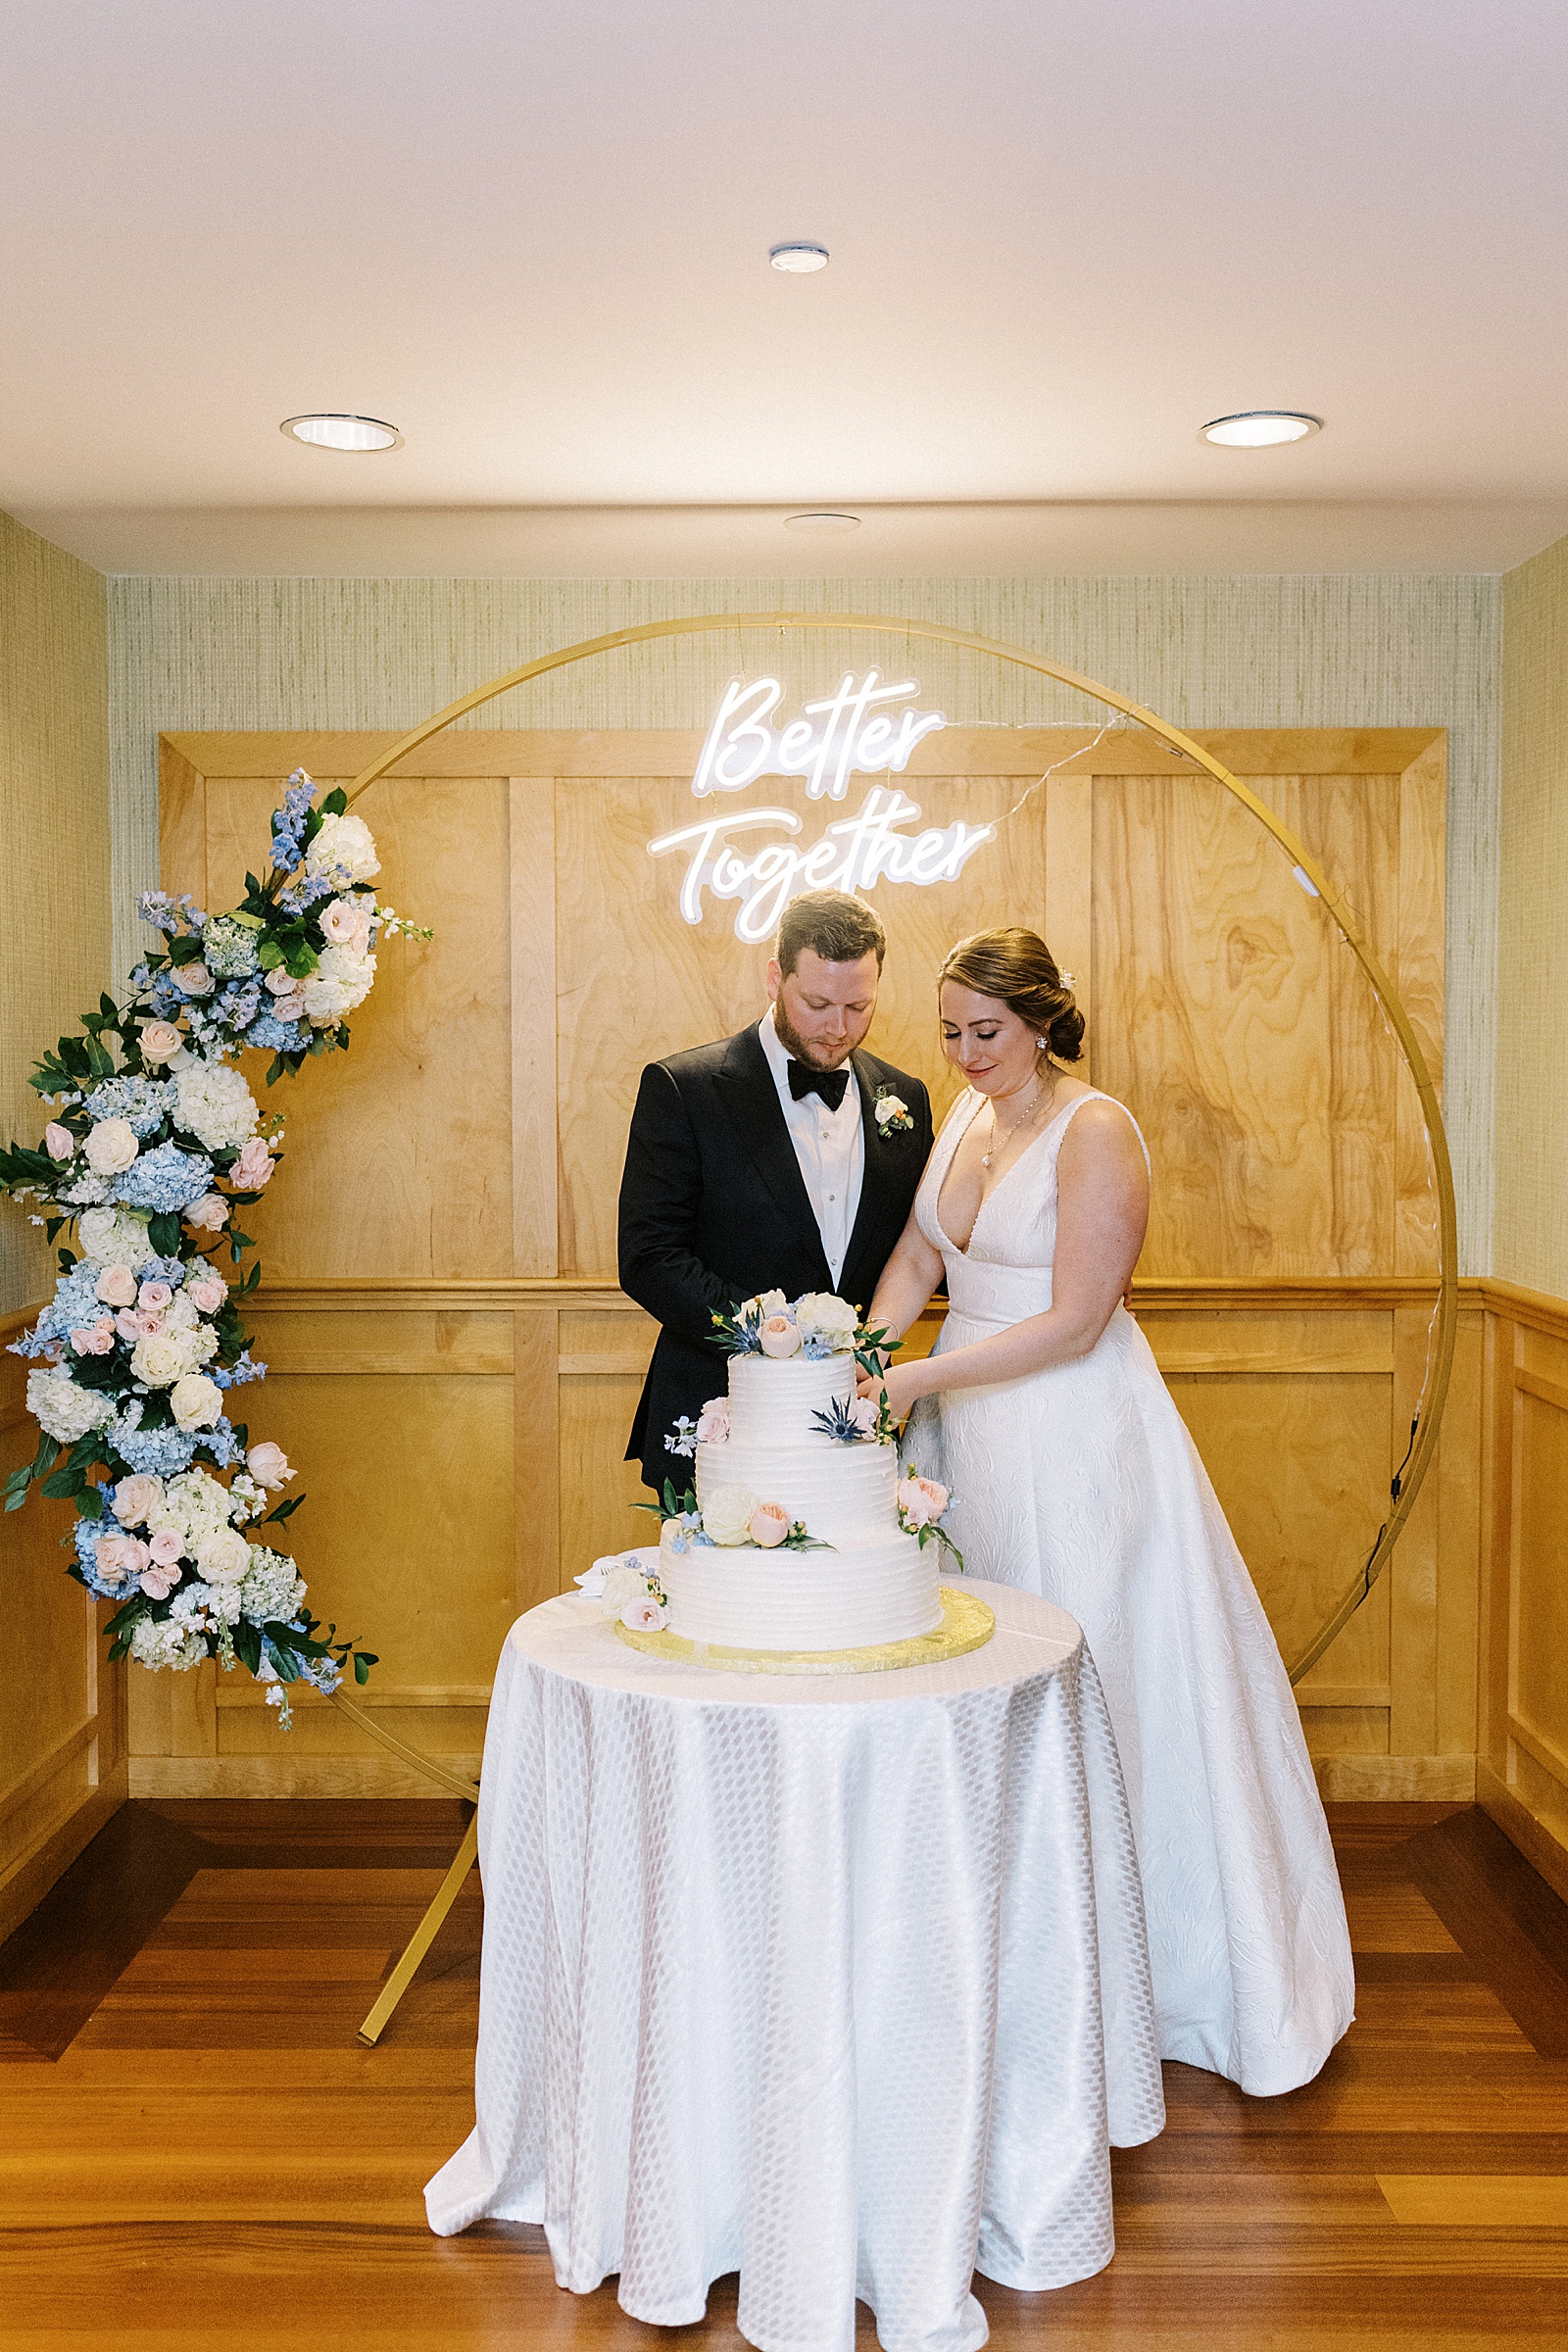 Newlyweds cutting a cake in front of gold arch and neon sign